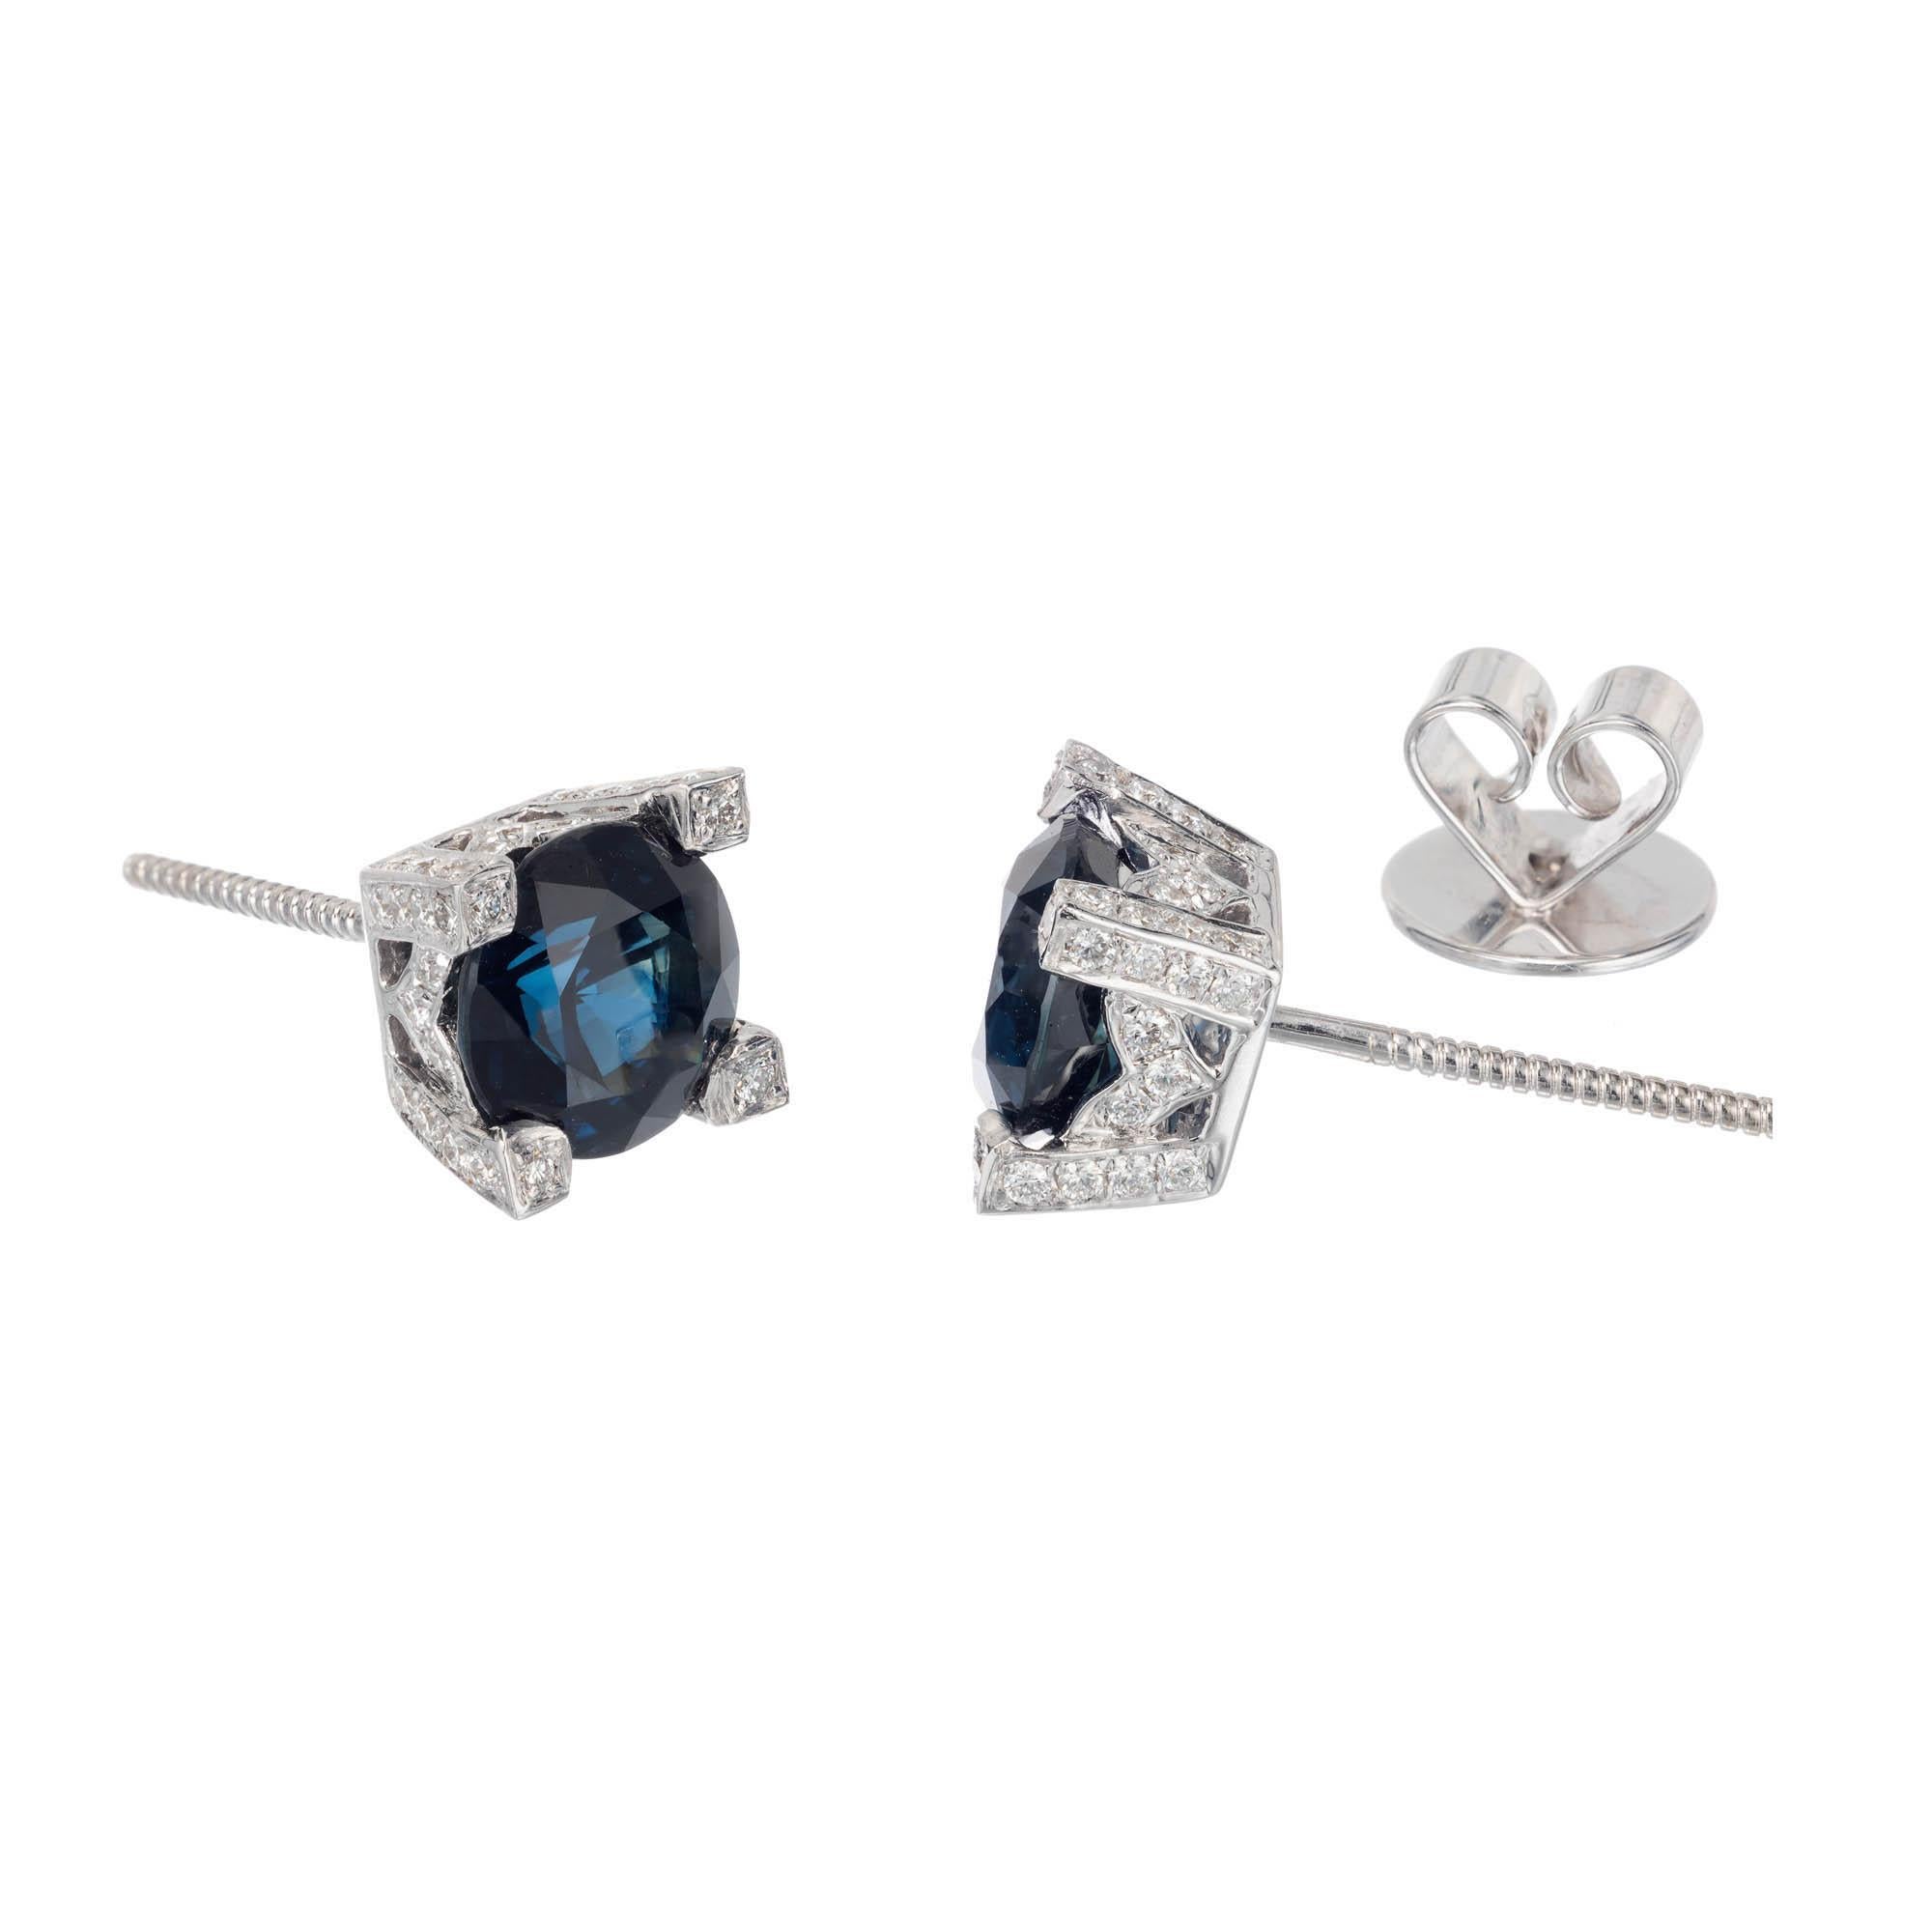 Round Cut Peter Suchy GIA Certified 5.02 Carat Sapphire Diamond Stud Earrings For Sale